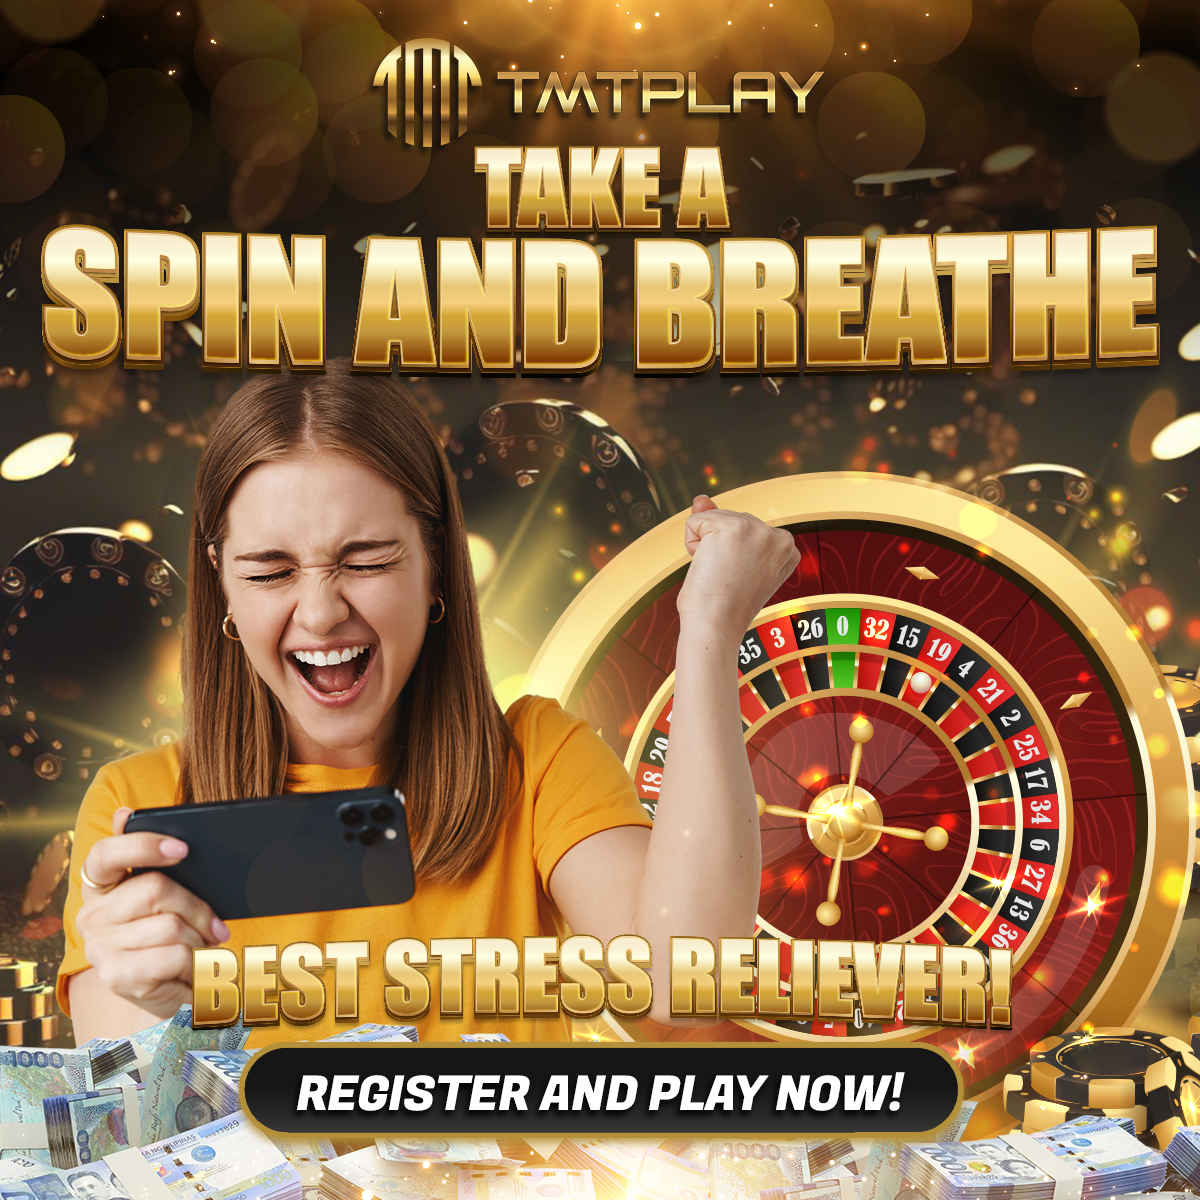 Spin and Win Roulette